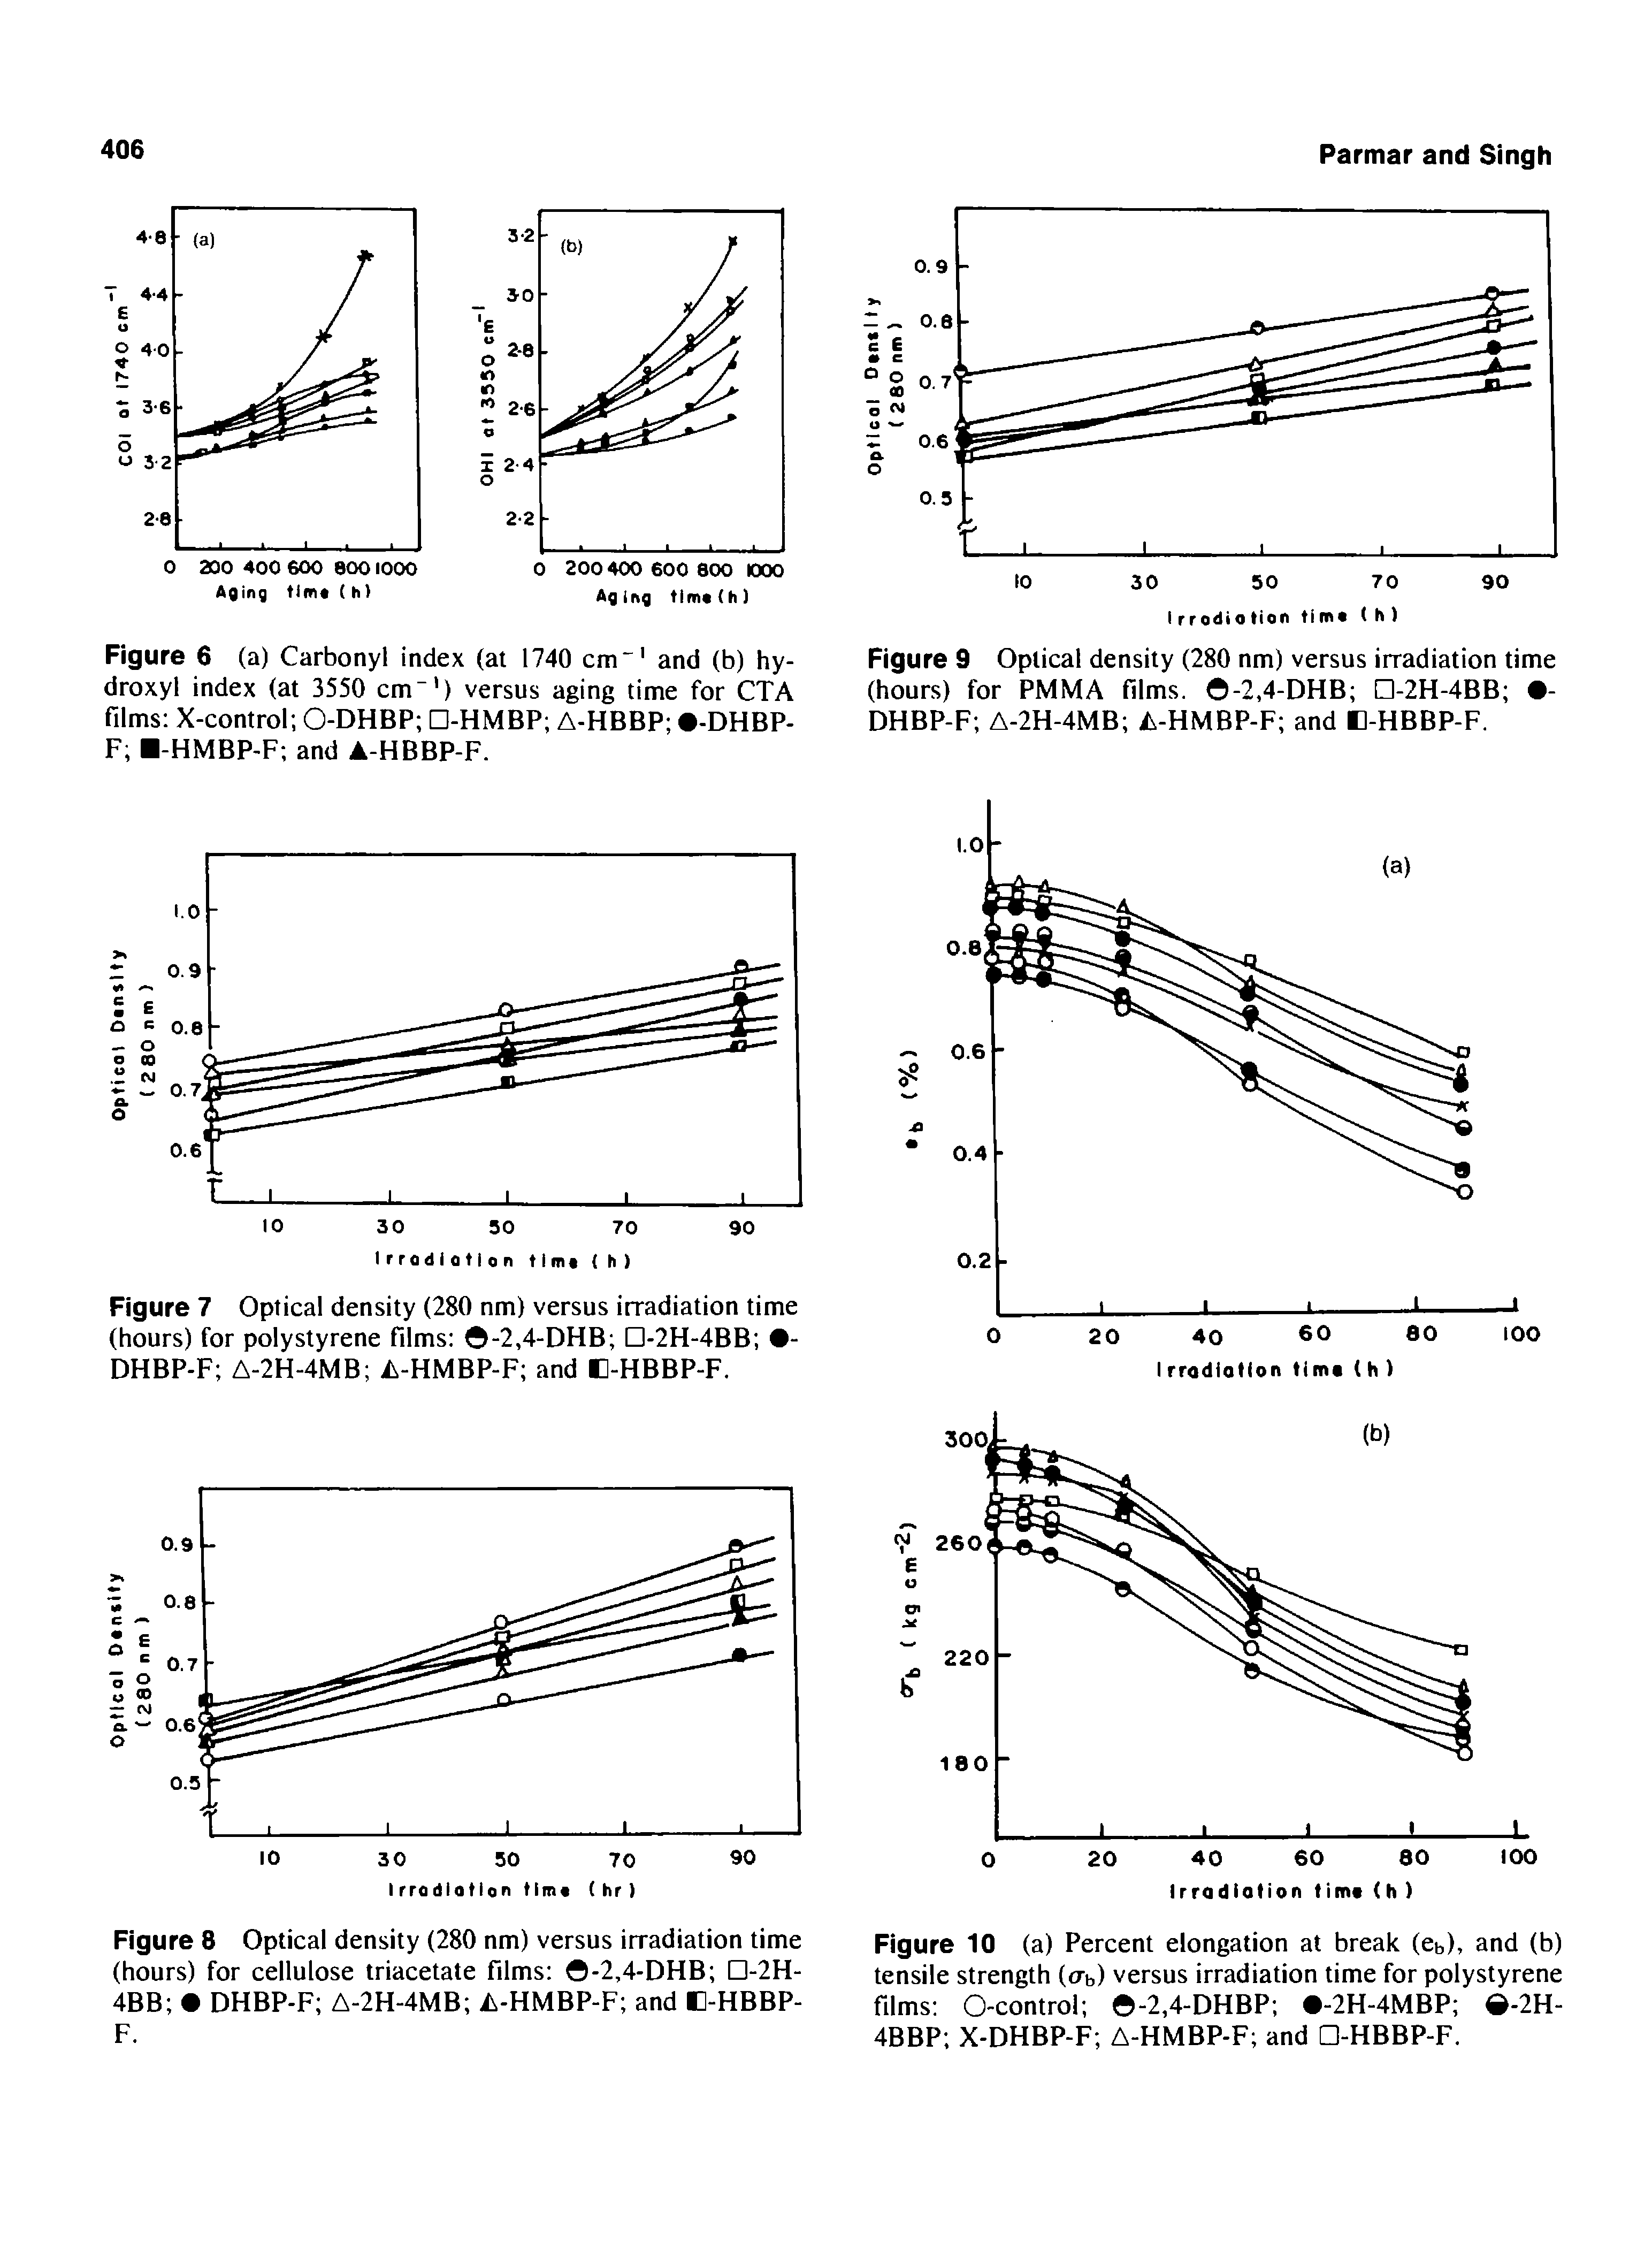 Figure 9 Optical density (280 nm) versus irradiation time (hours) for PMMA films. -2,4-DHB -2H-4BB -DHBP-F A-2H-4MB A-HMBP-F and B-HBBP-F.